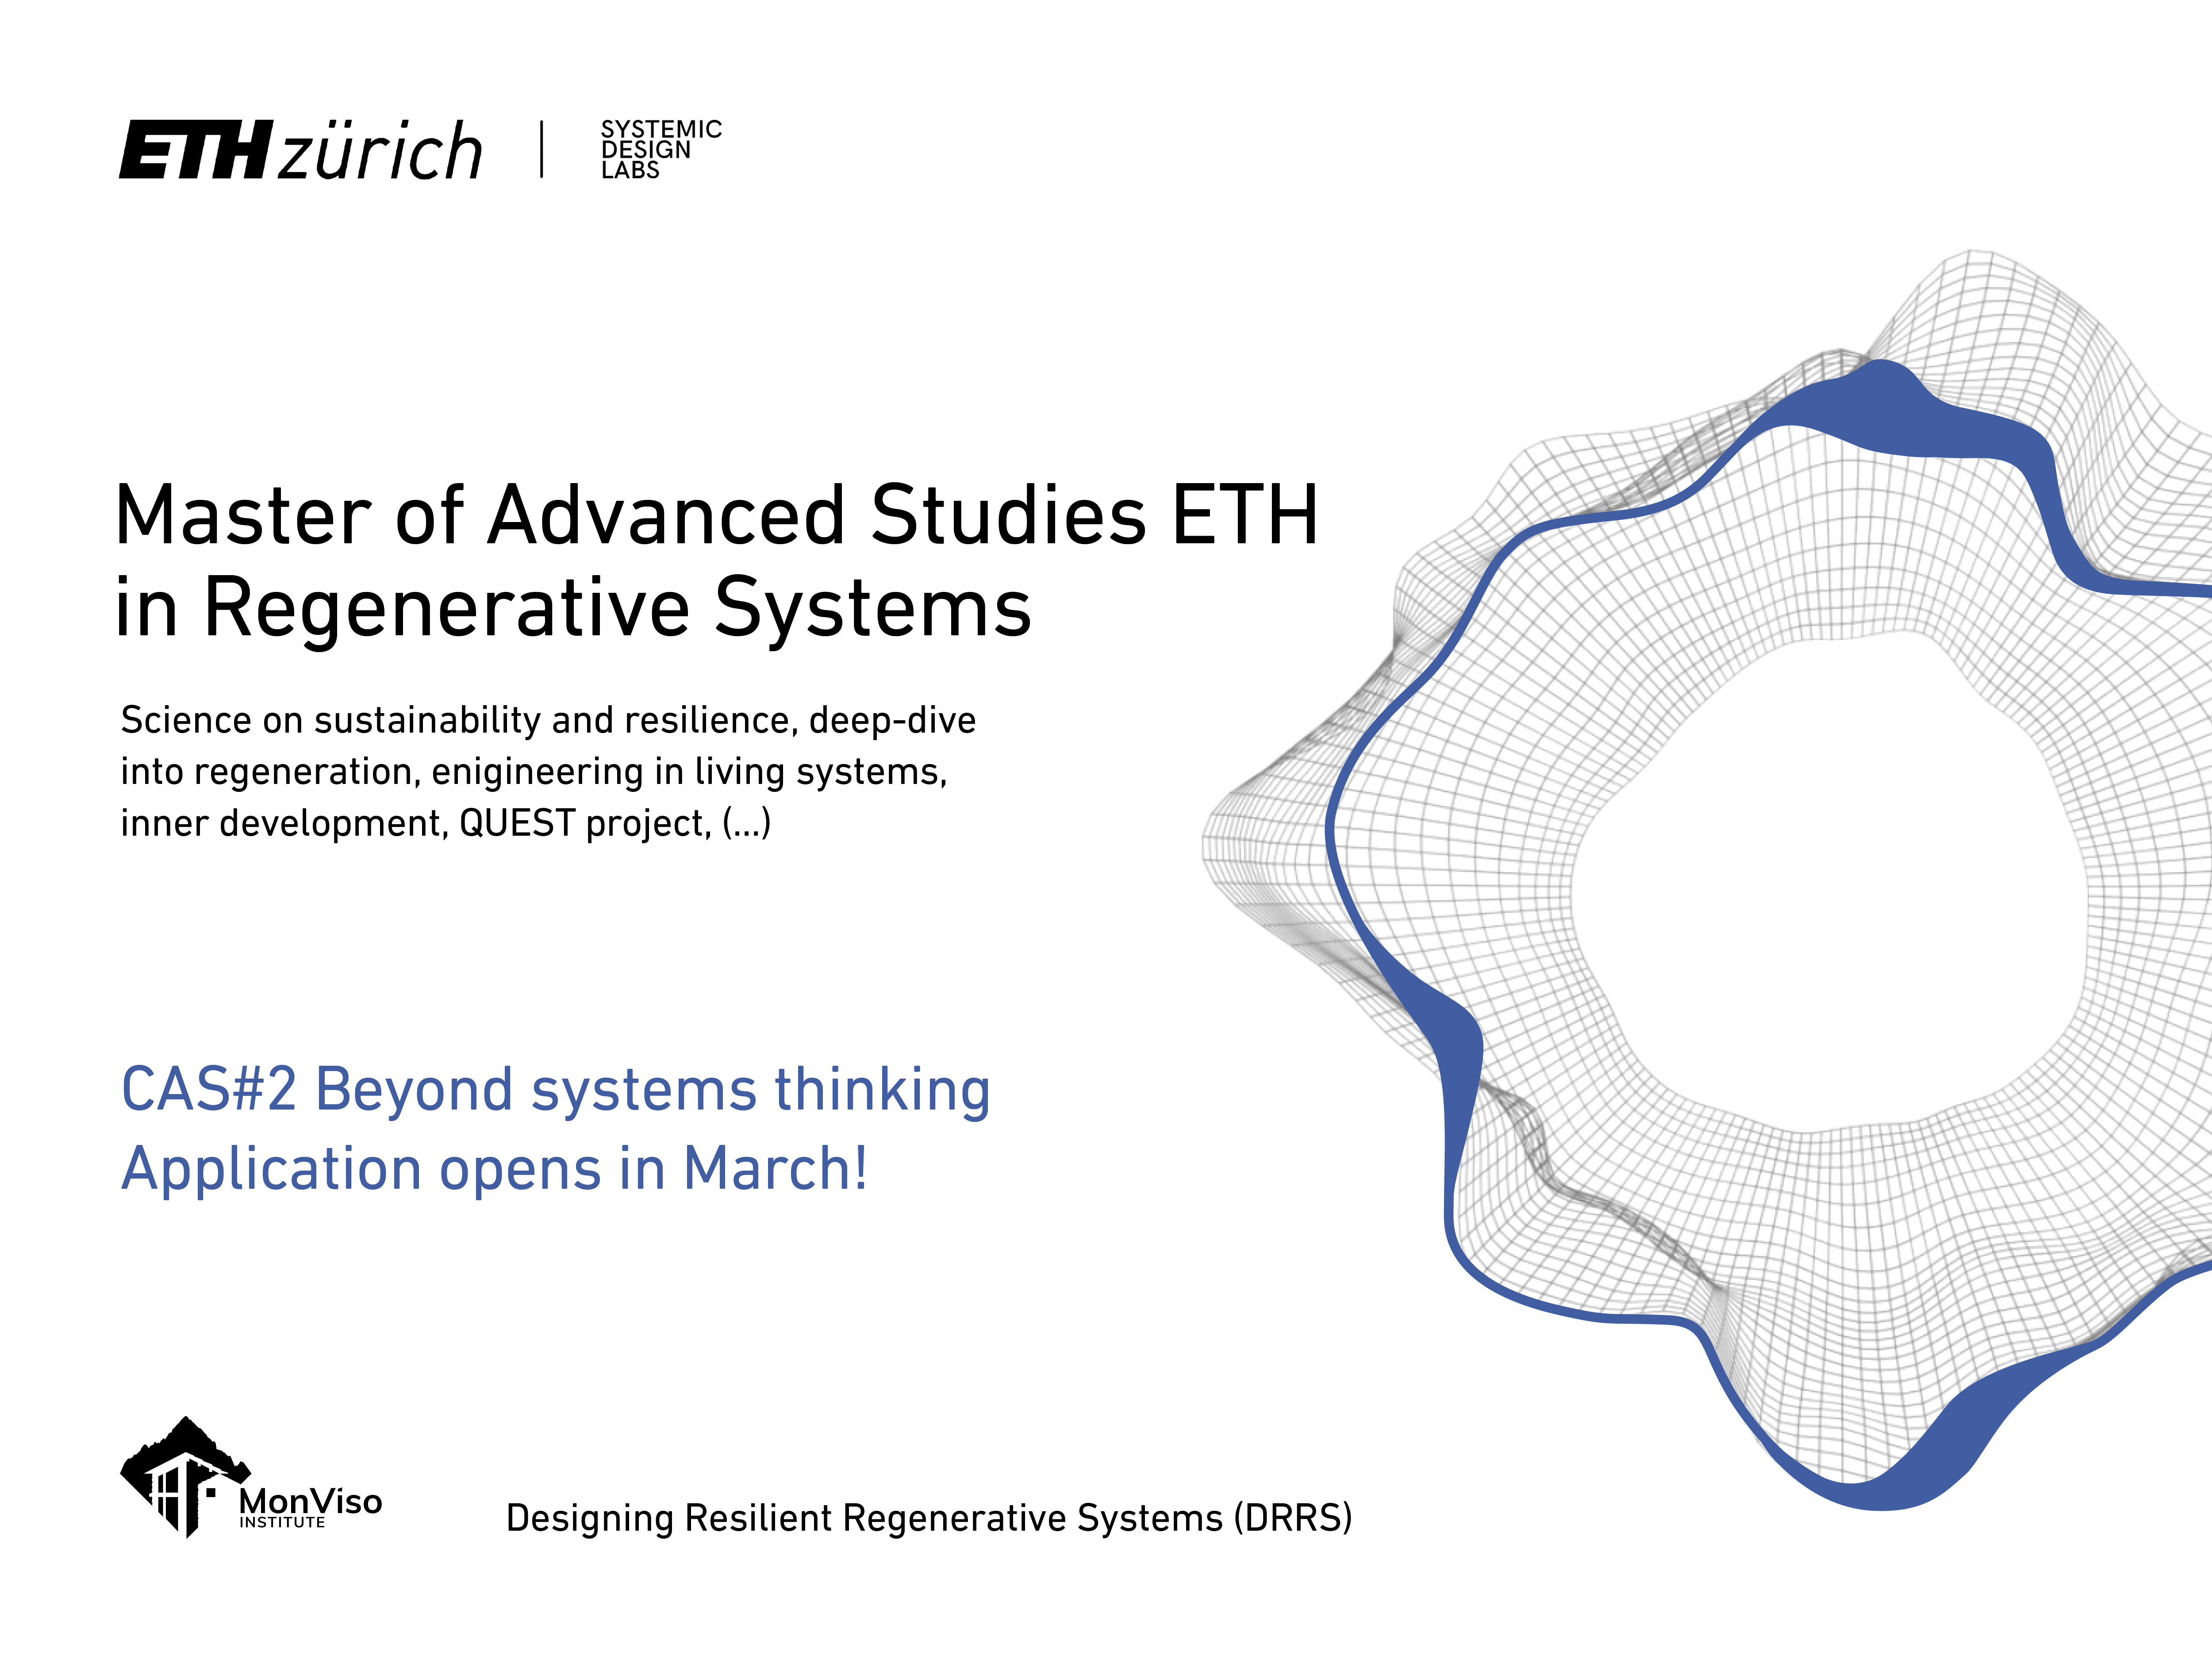 Master of Advanced Studies ETH in Regenerative Systems